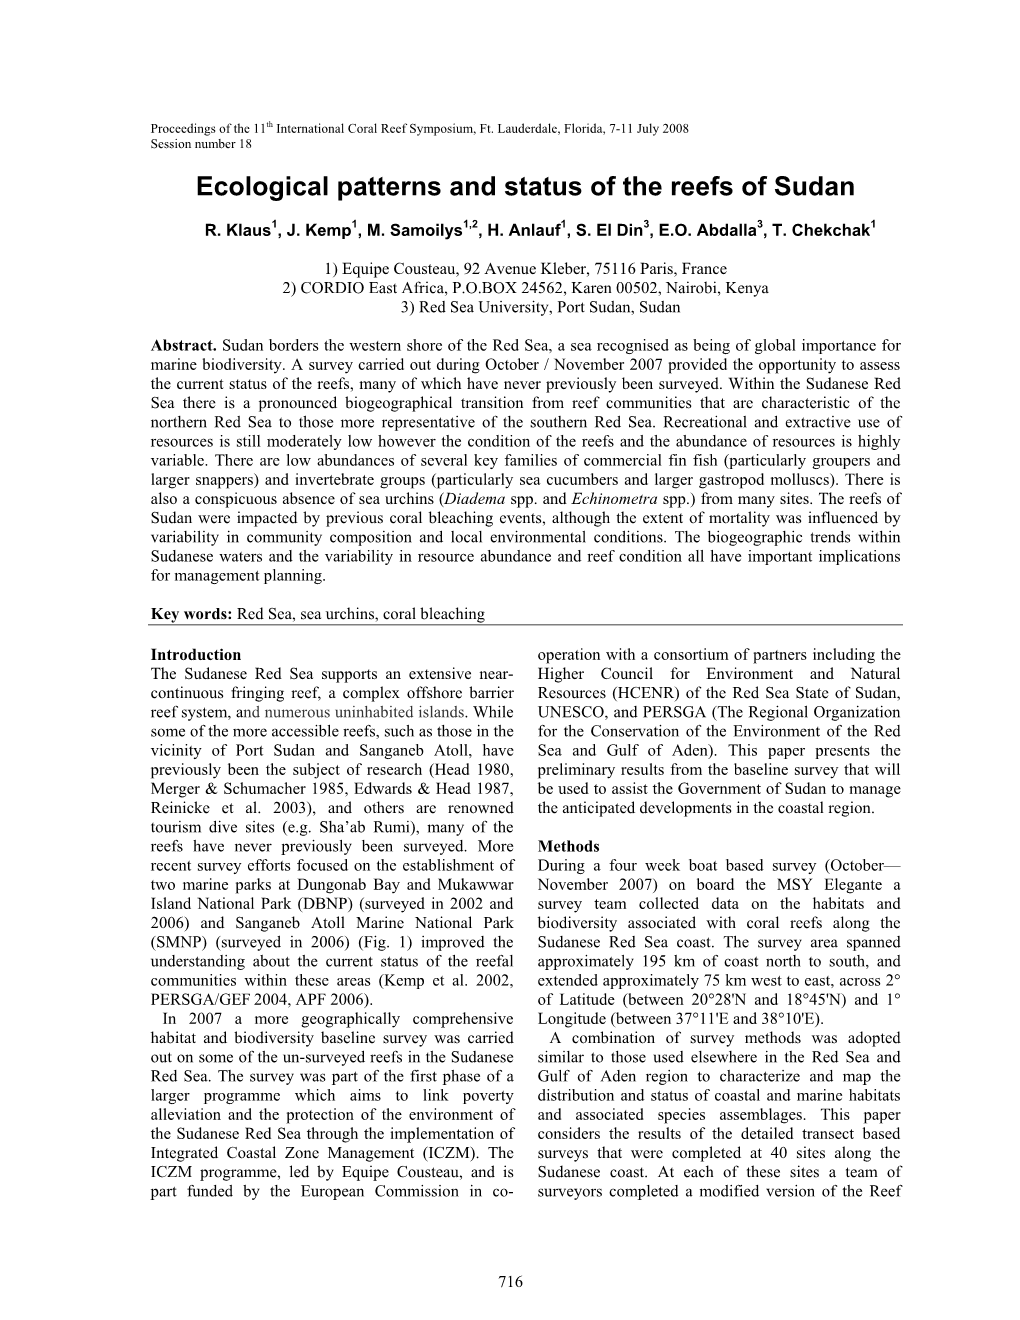 Ecological Patterns and Status of the Reefs of Sudan